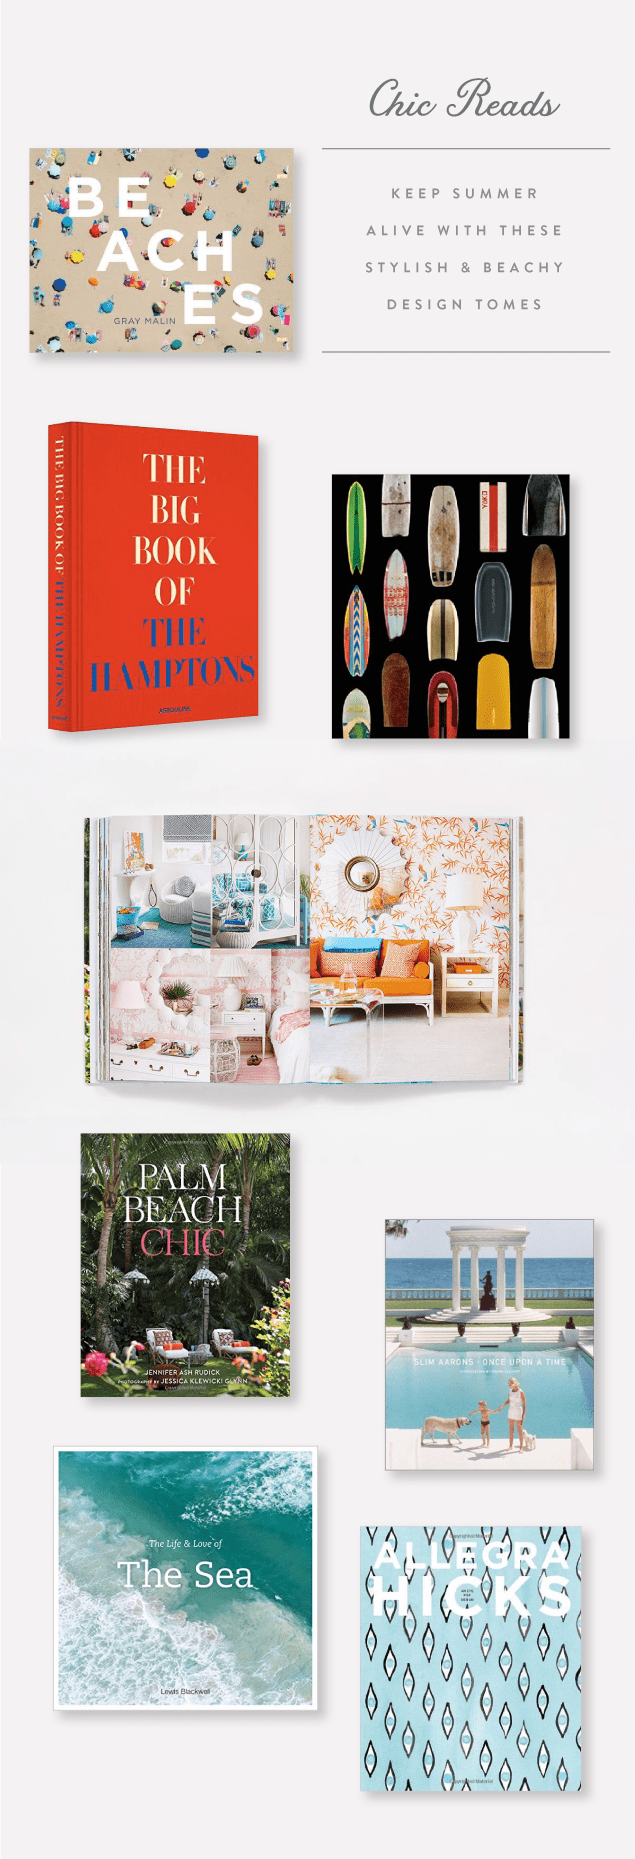 Chic reads: beachy coffee table books to keep summer lasting forever - www.pencilshavingsstudio.com